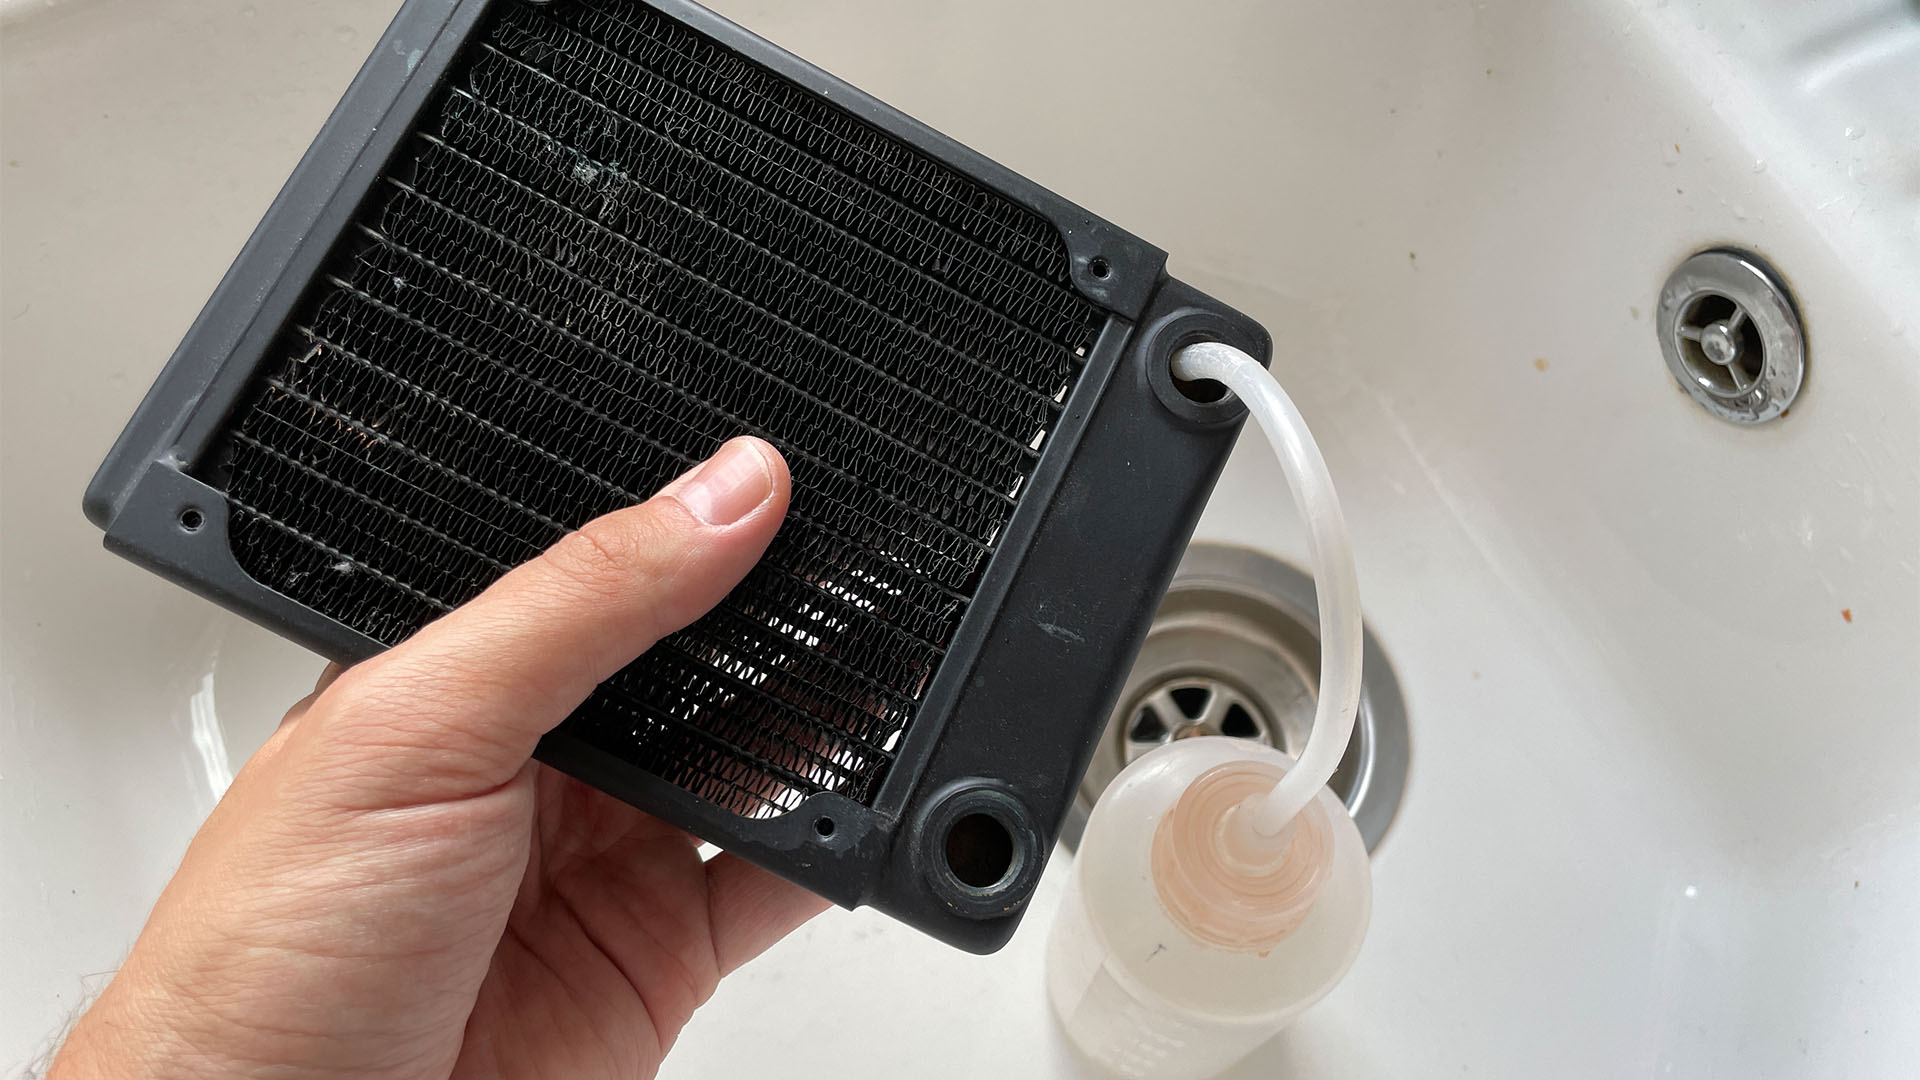 Rinsing out a water-cooling radiator